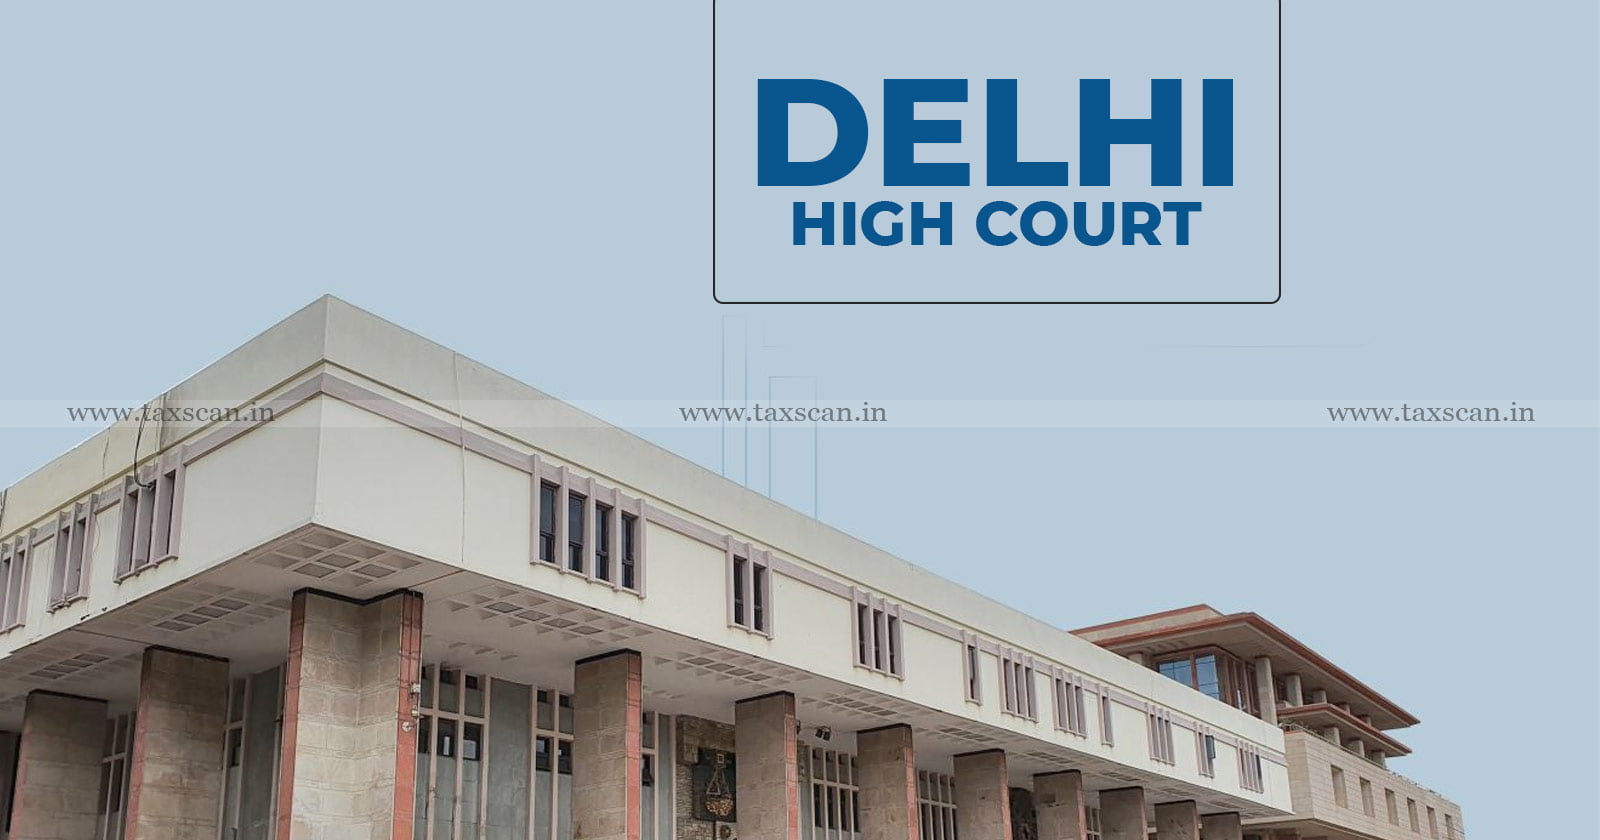 Delhi High Court - Clandestine removal - Under valuation charges - Grounds for charges - TAXSCAN